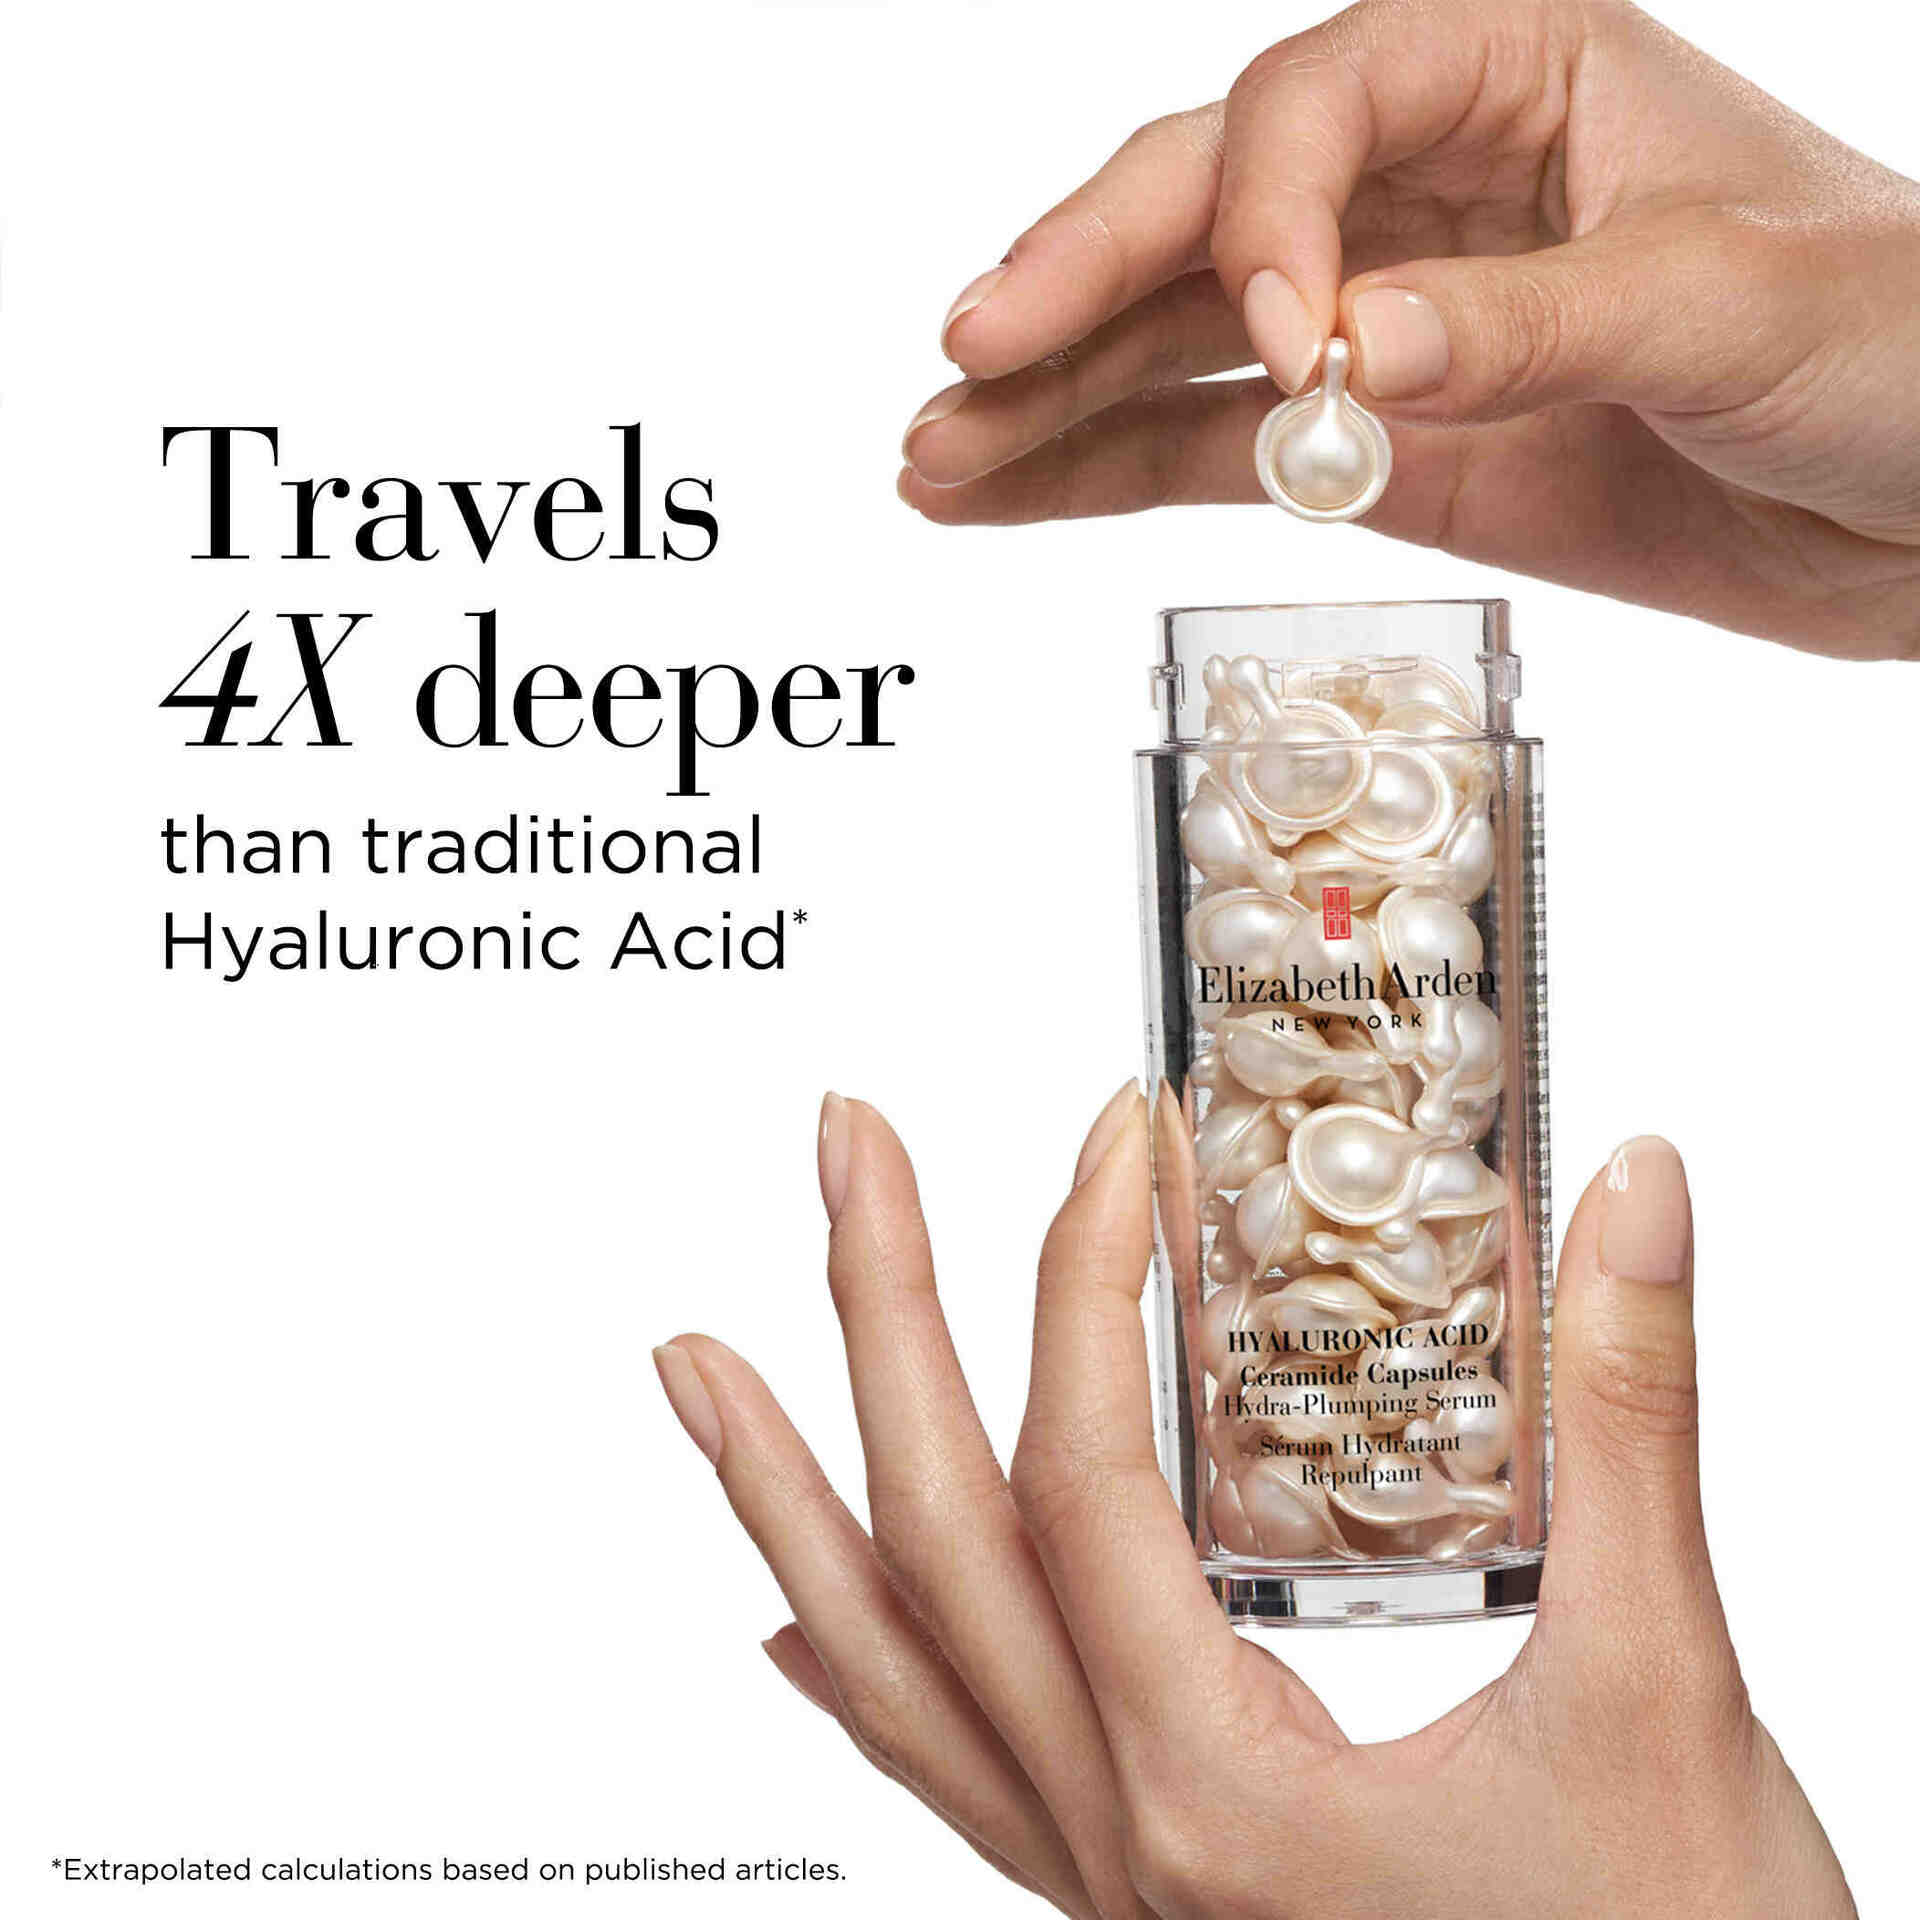 Travels 4x deeper than traditional Hyaluronic Acid extrapolated based on Published articles and molecular weight of HA. Plump skin, redefine facial contours and hydrate parched skin for a dewy glow